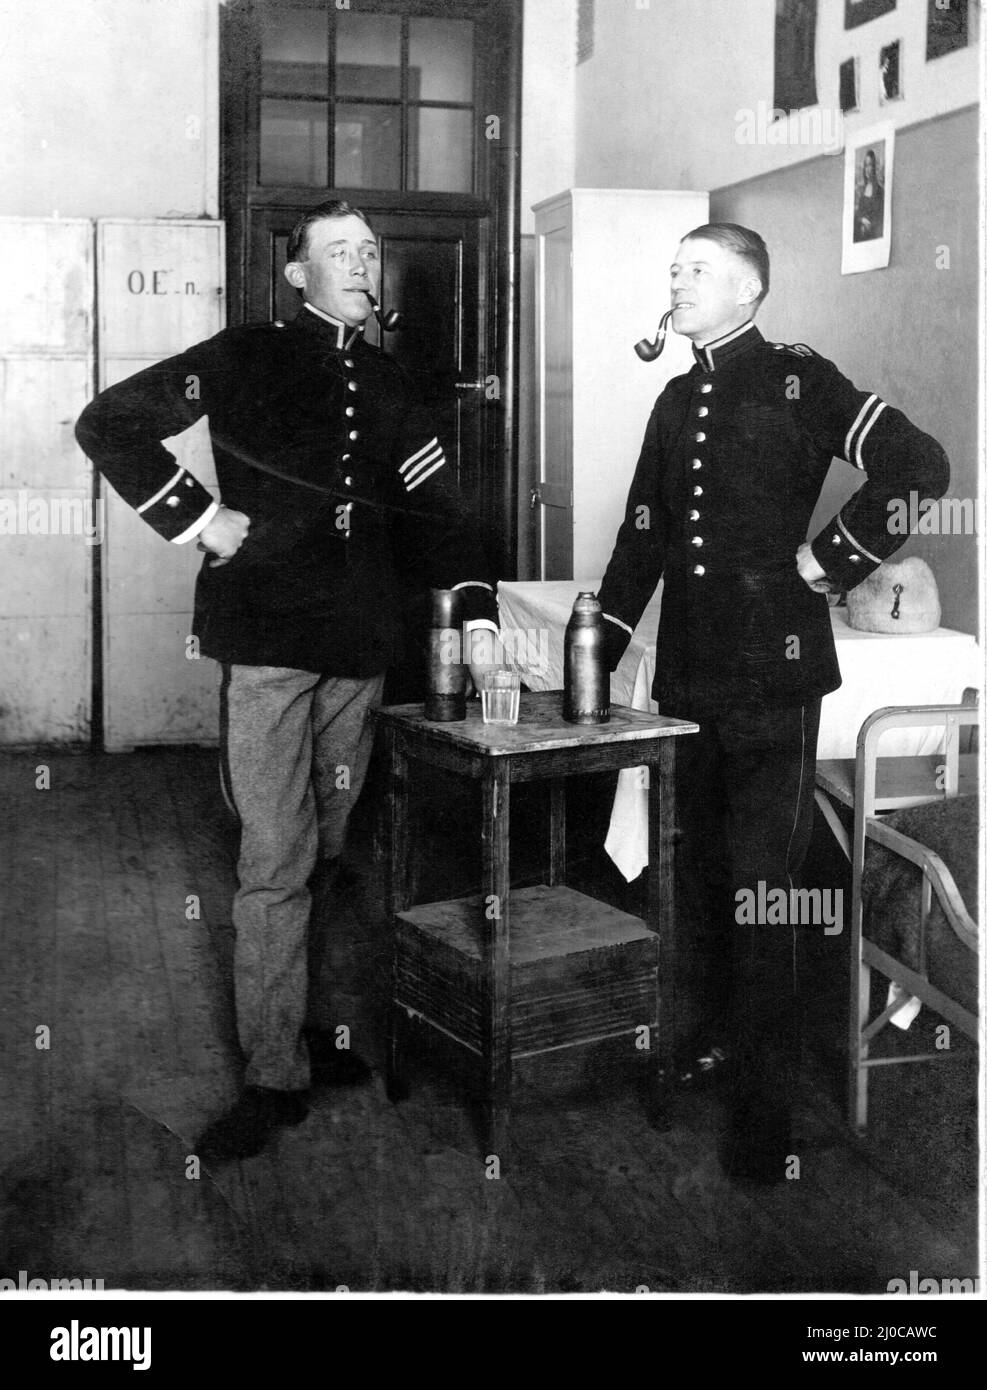 Authentic vintage photograph of two soldiers hands on hips smoking pipes, standing next to drinking flasks on table, Sweden. Concept of togetherness Stock Photo